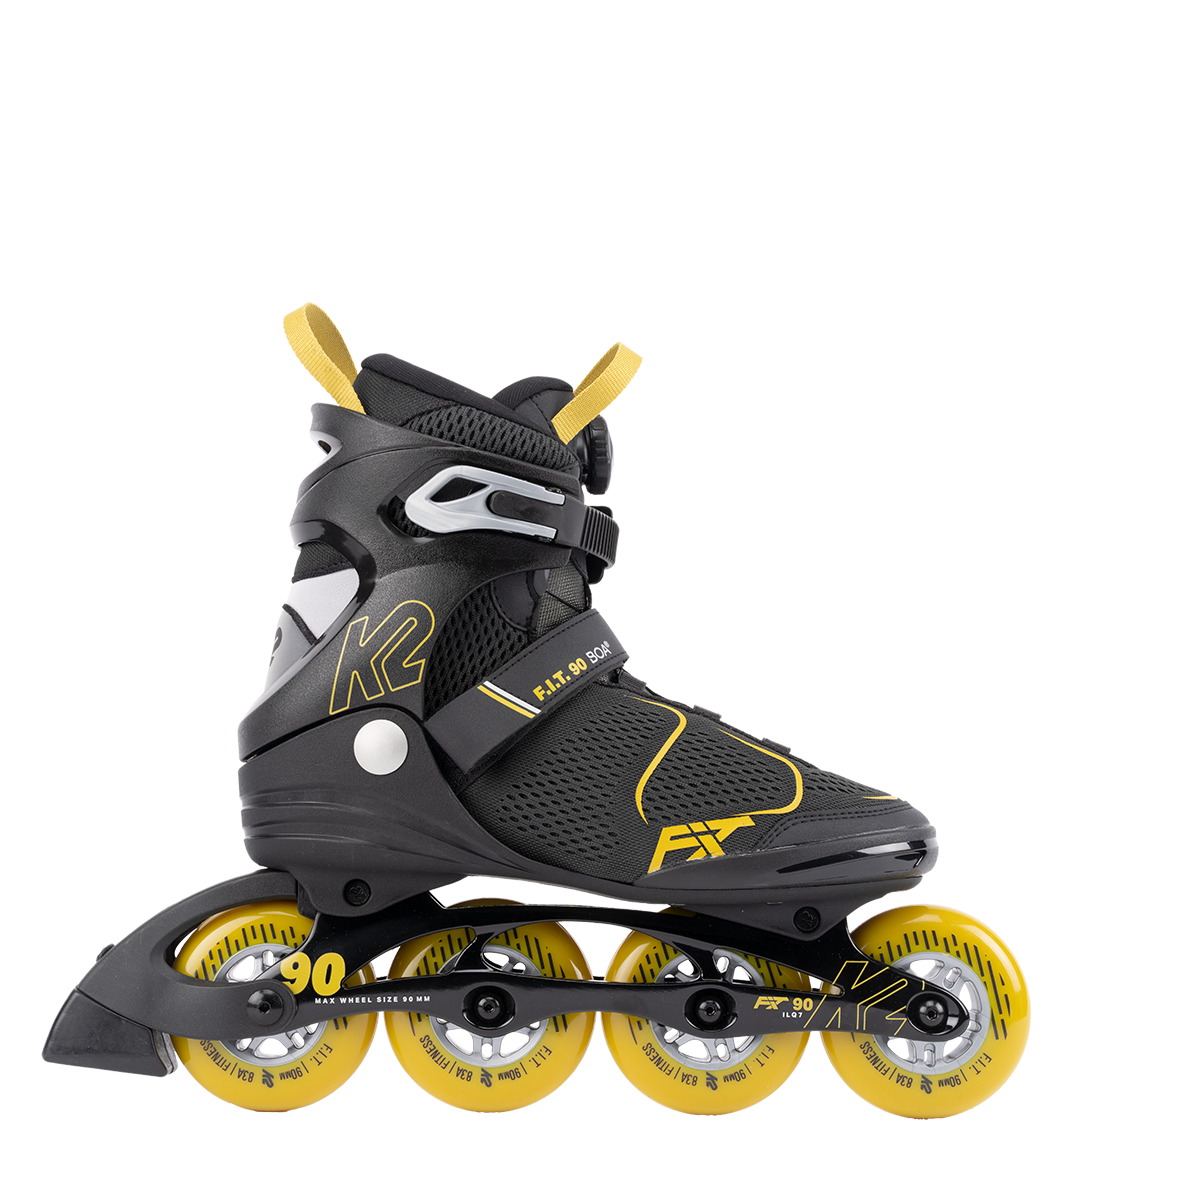 A side view of the K2 F.I.T. 90 BOA inline skate.